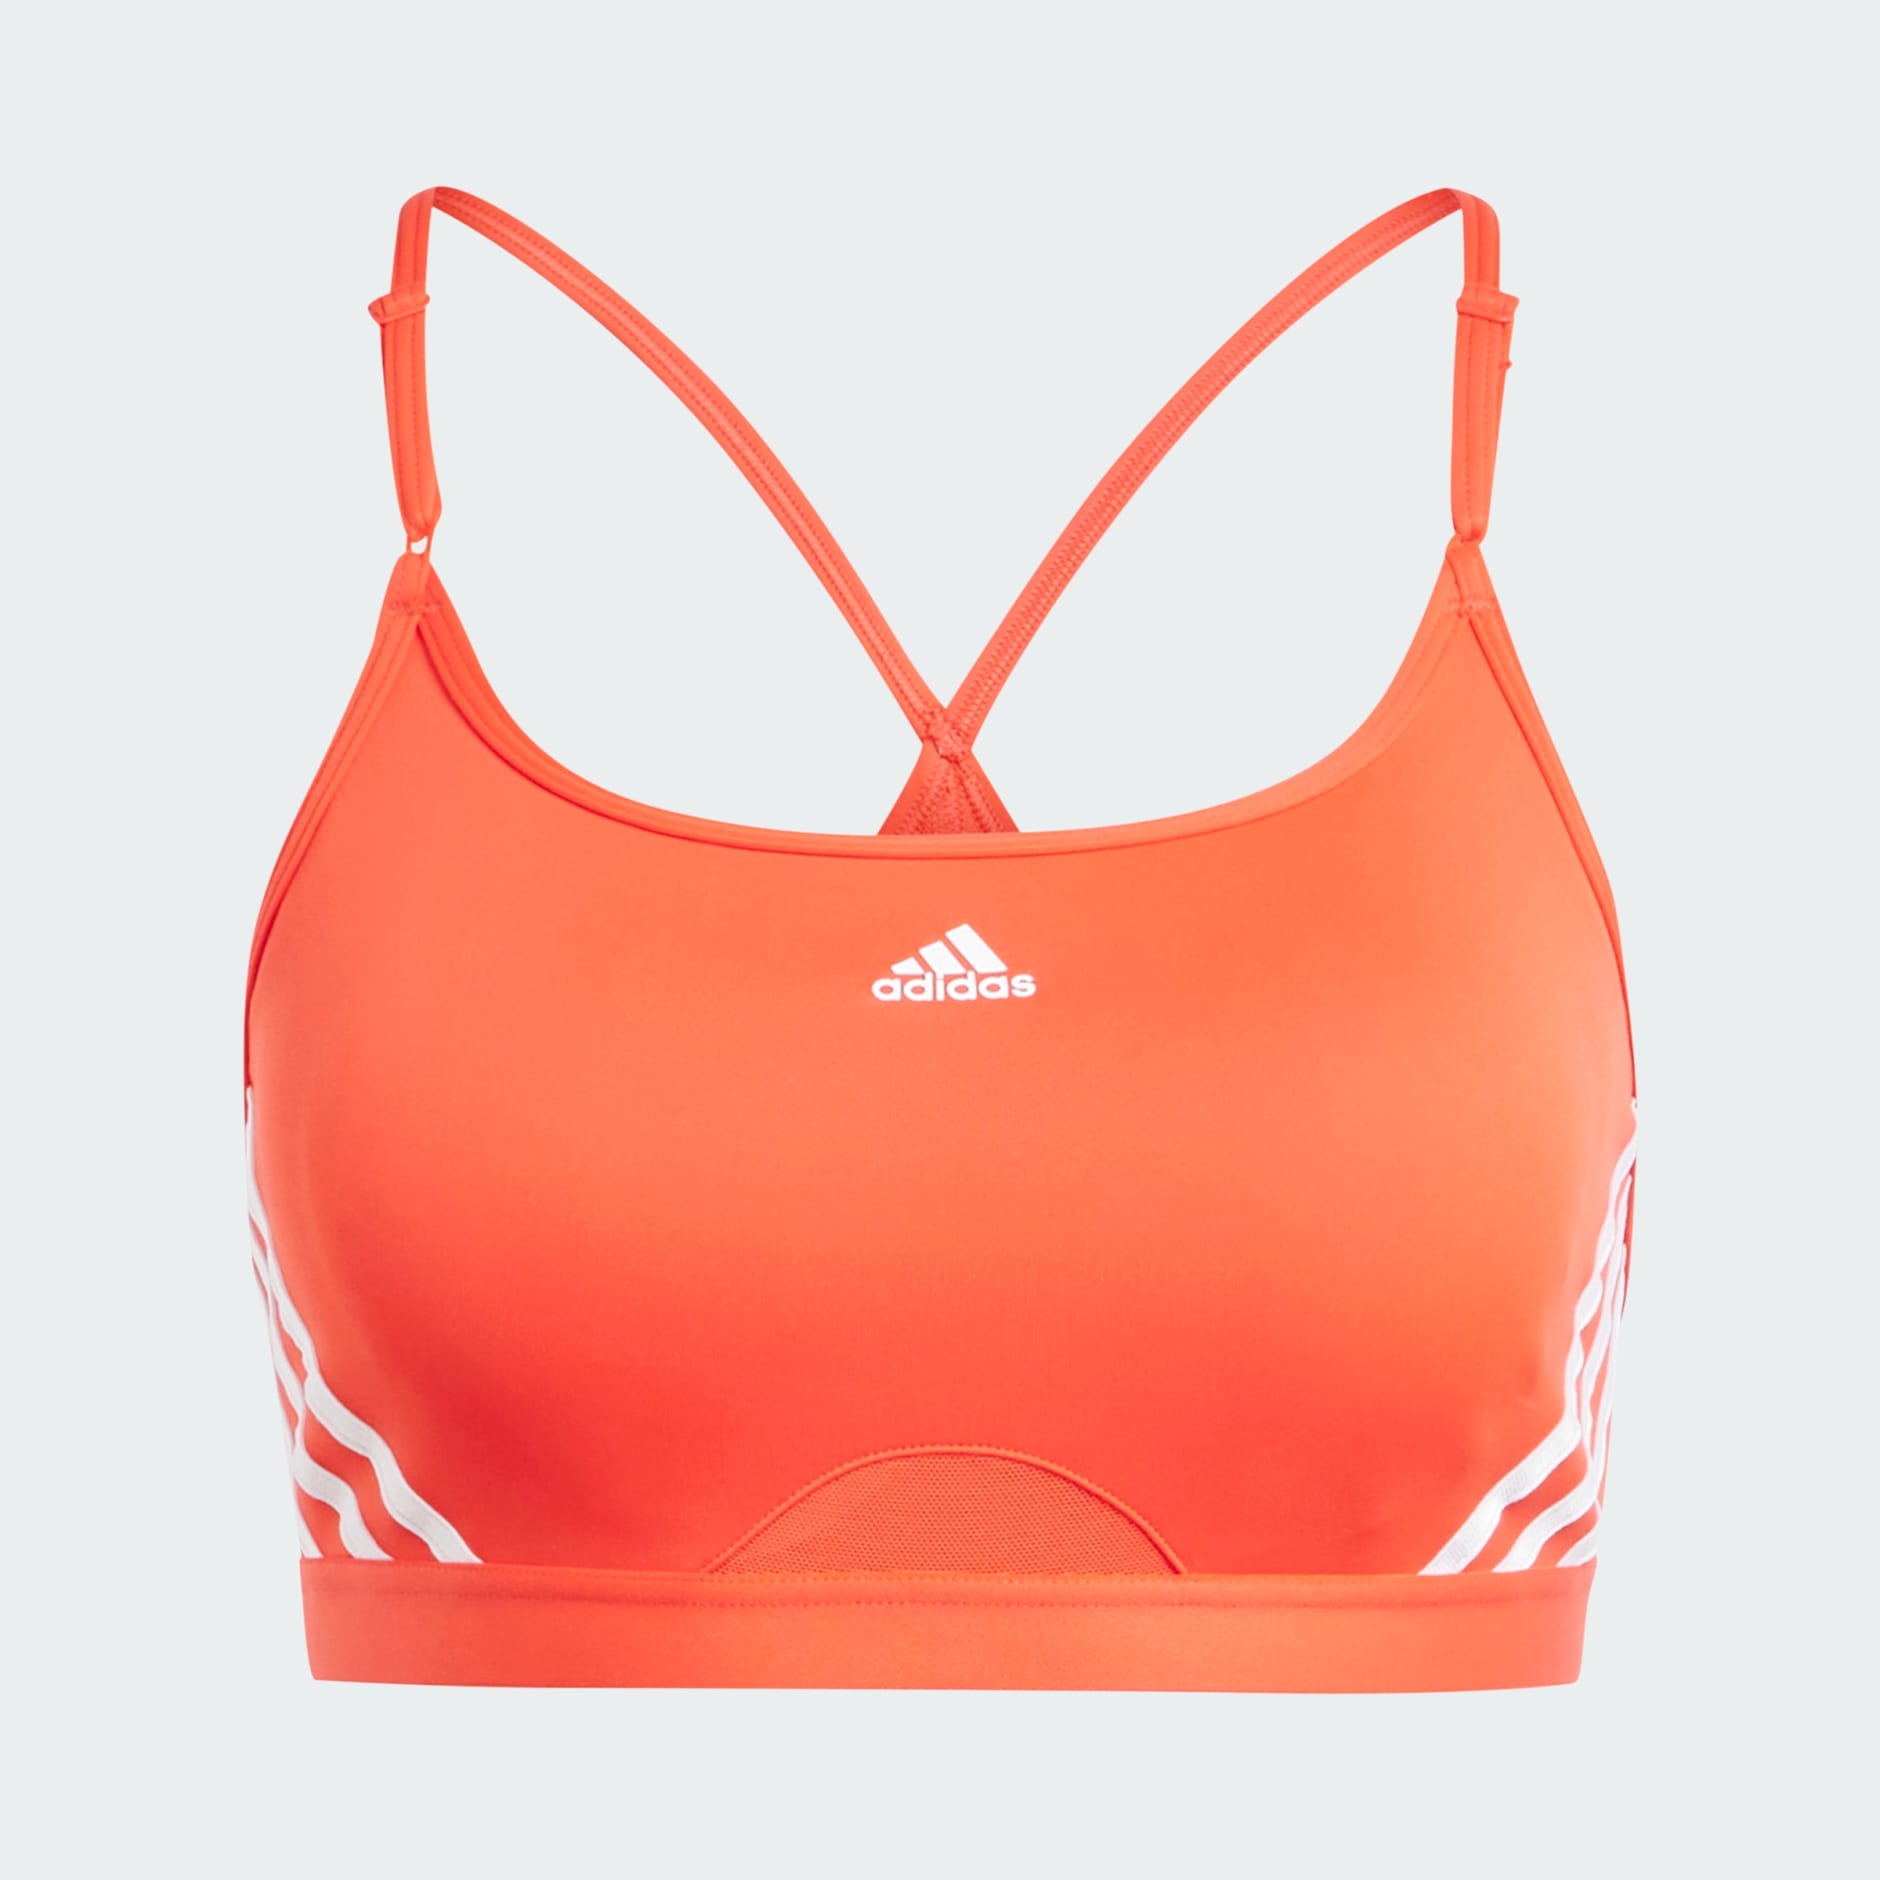 BRASSIERE ADIDAS FEMME AEROREACT LOW SUPPORT - ADIDAS - Women's - Clothing